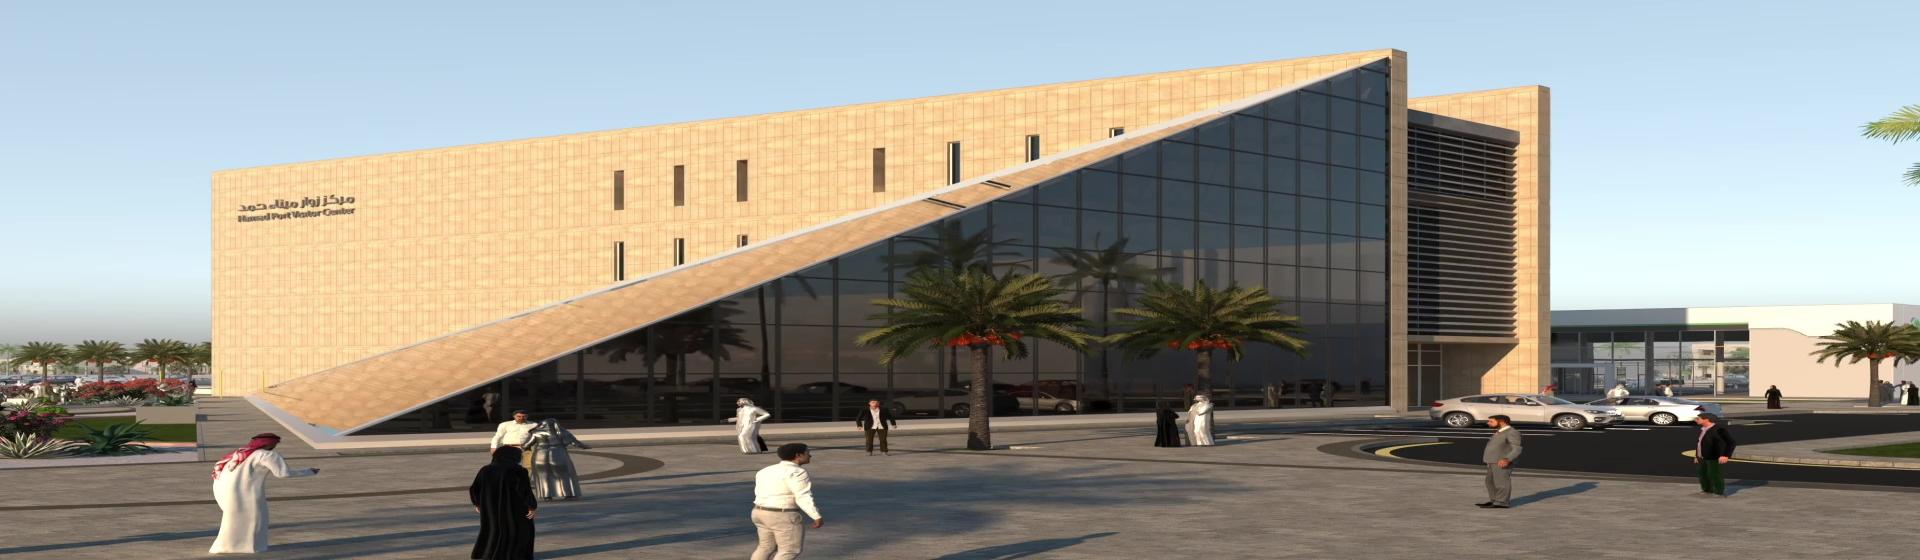 Hamad Port Visitor Center Opens Soon